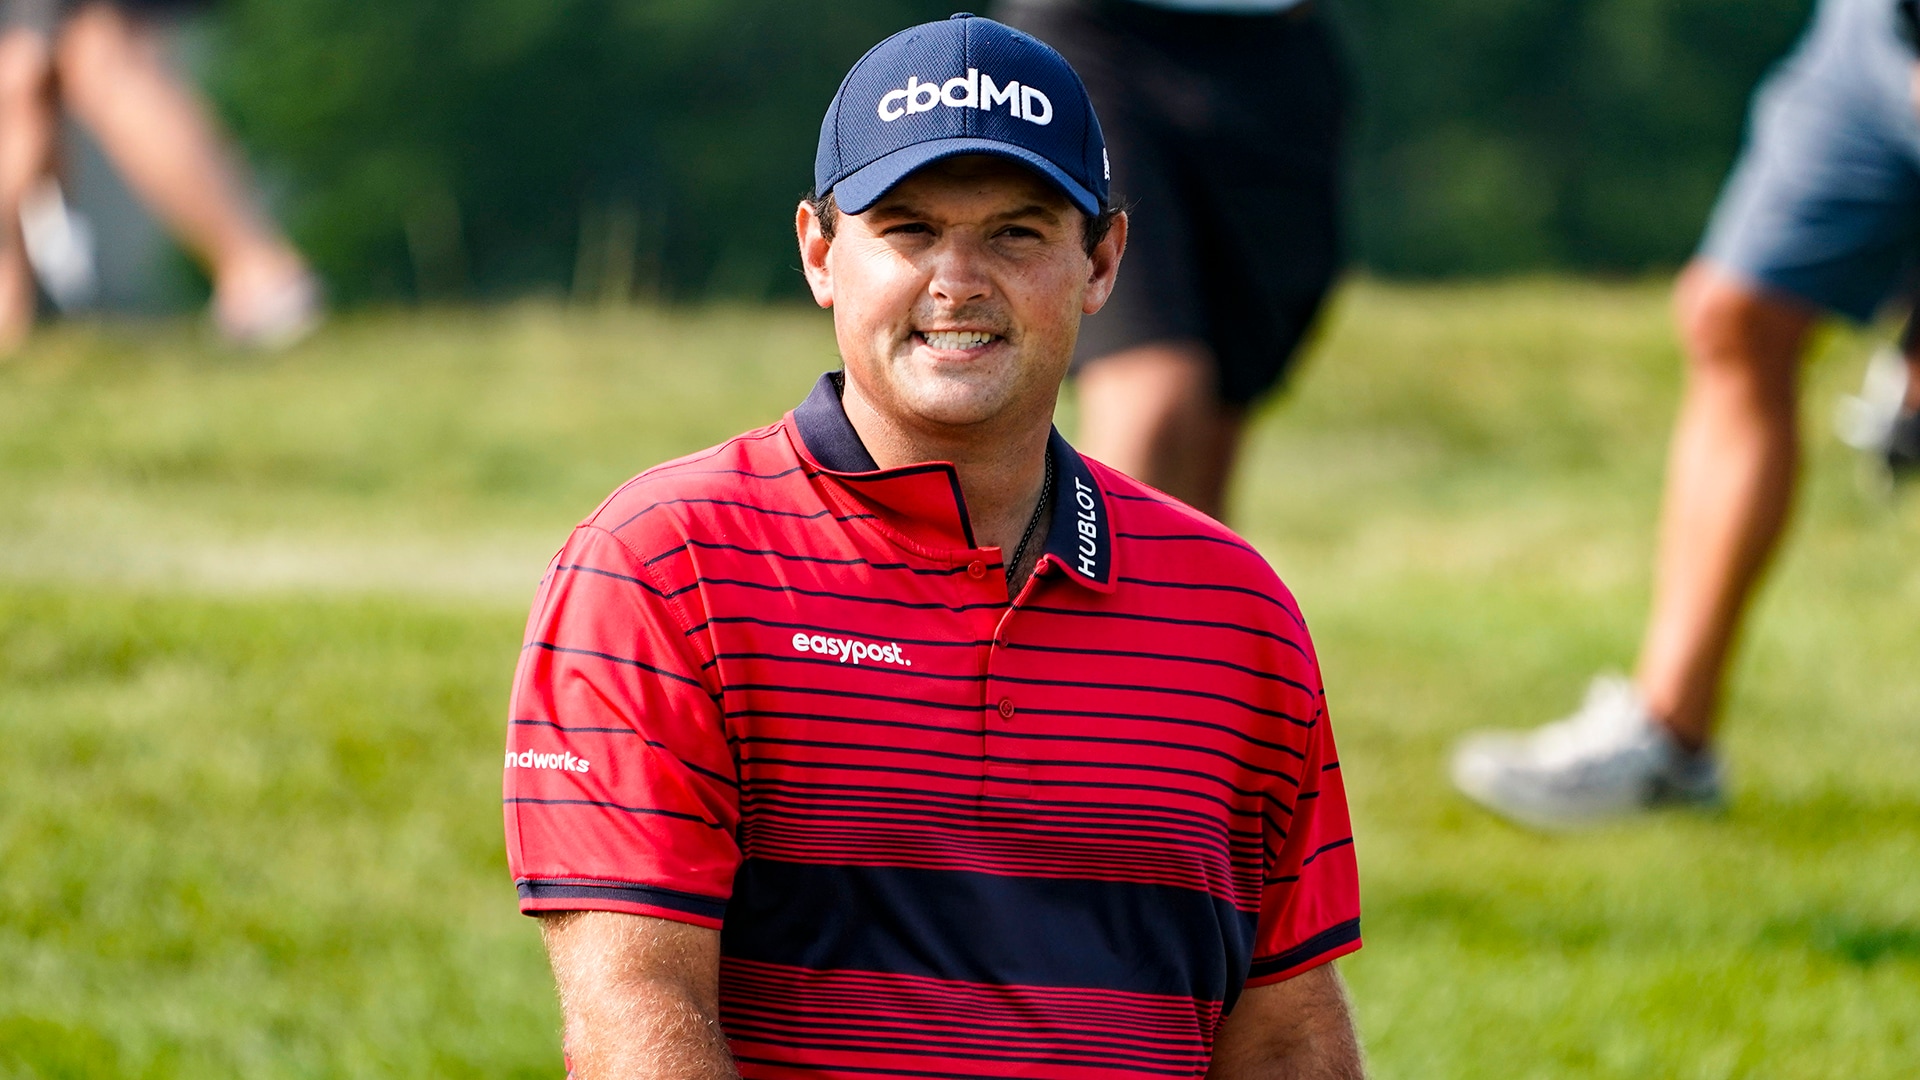 Patrick Reed Withdraws Again, Citing Ankle Injury